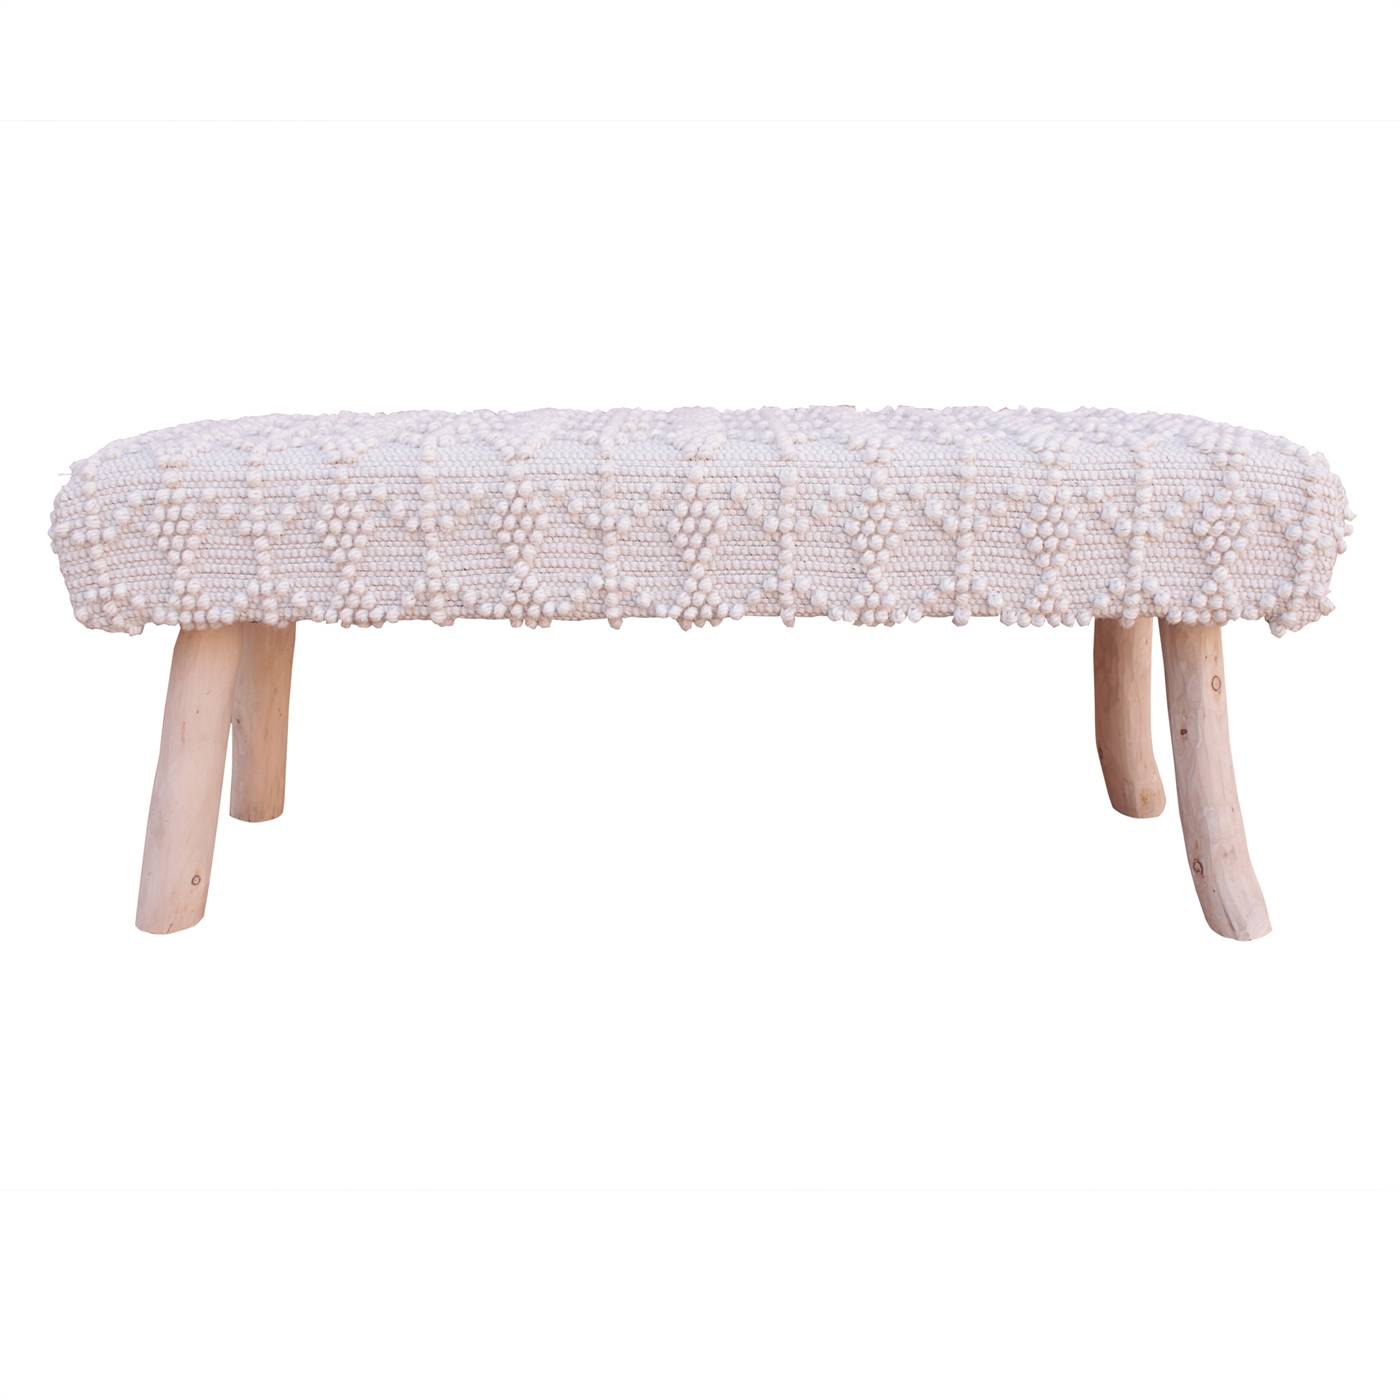 Kandos Bench, 120x40x50 cm, Natural White, Wool, Hand Woven, Pitloom, All Loop